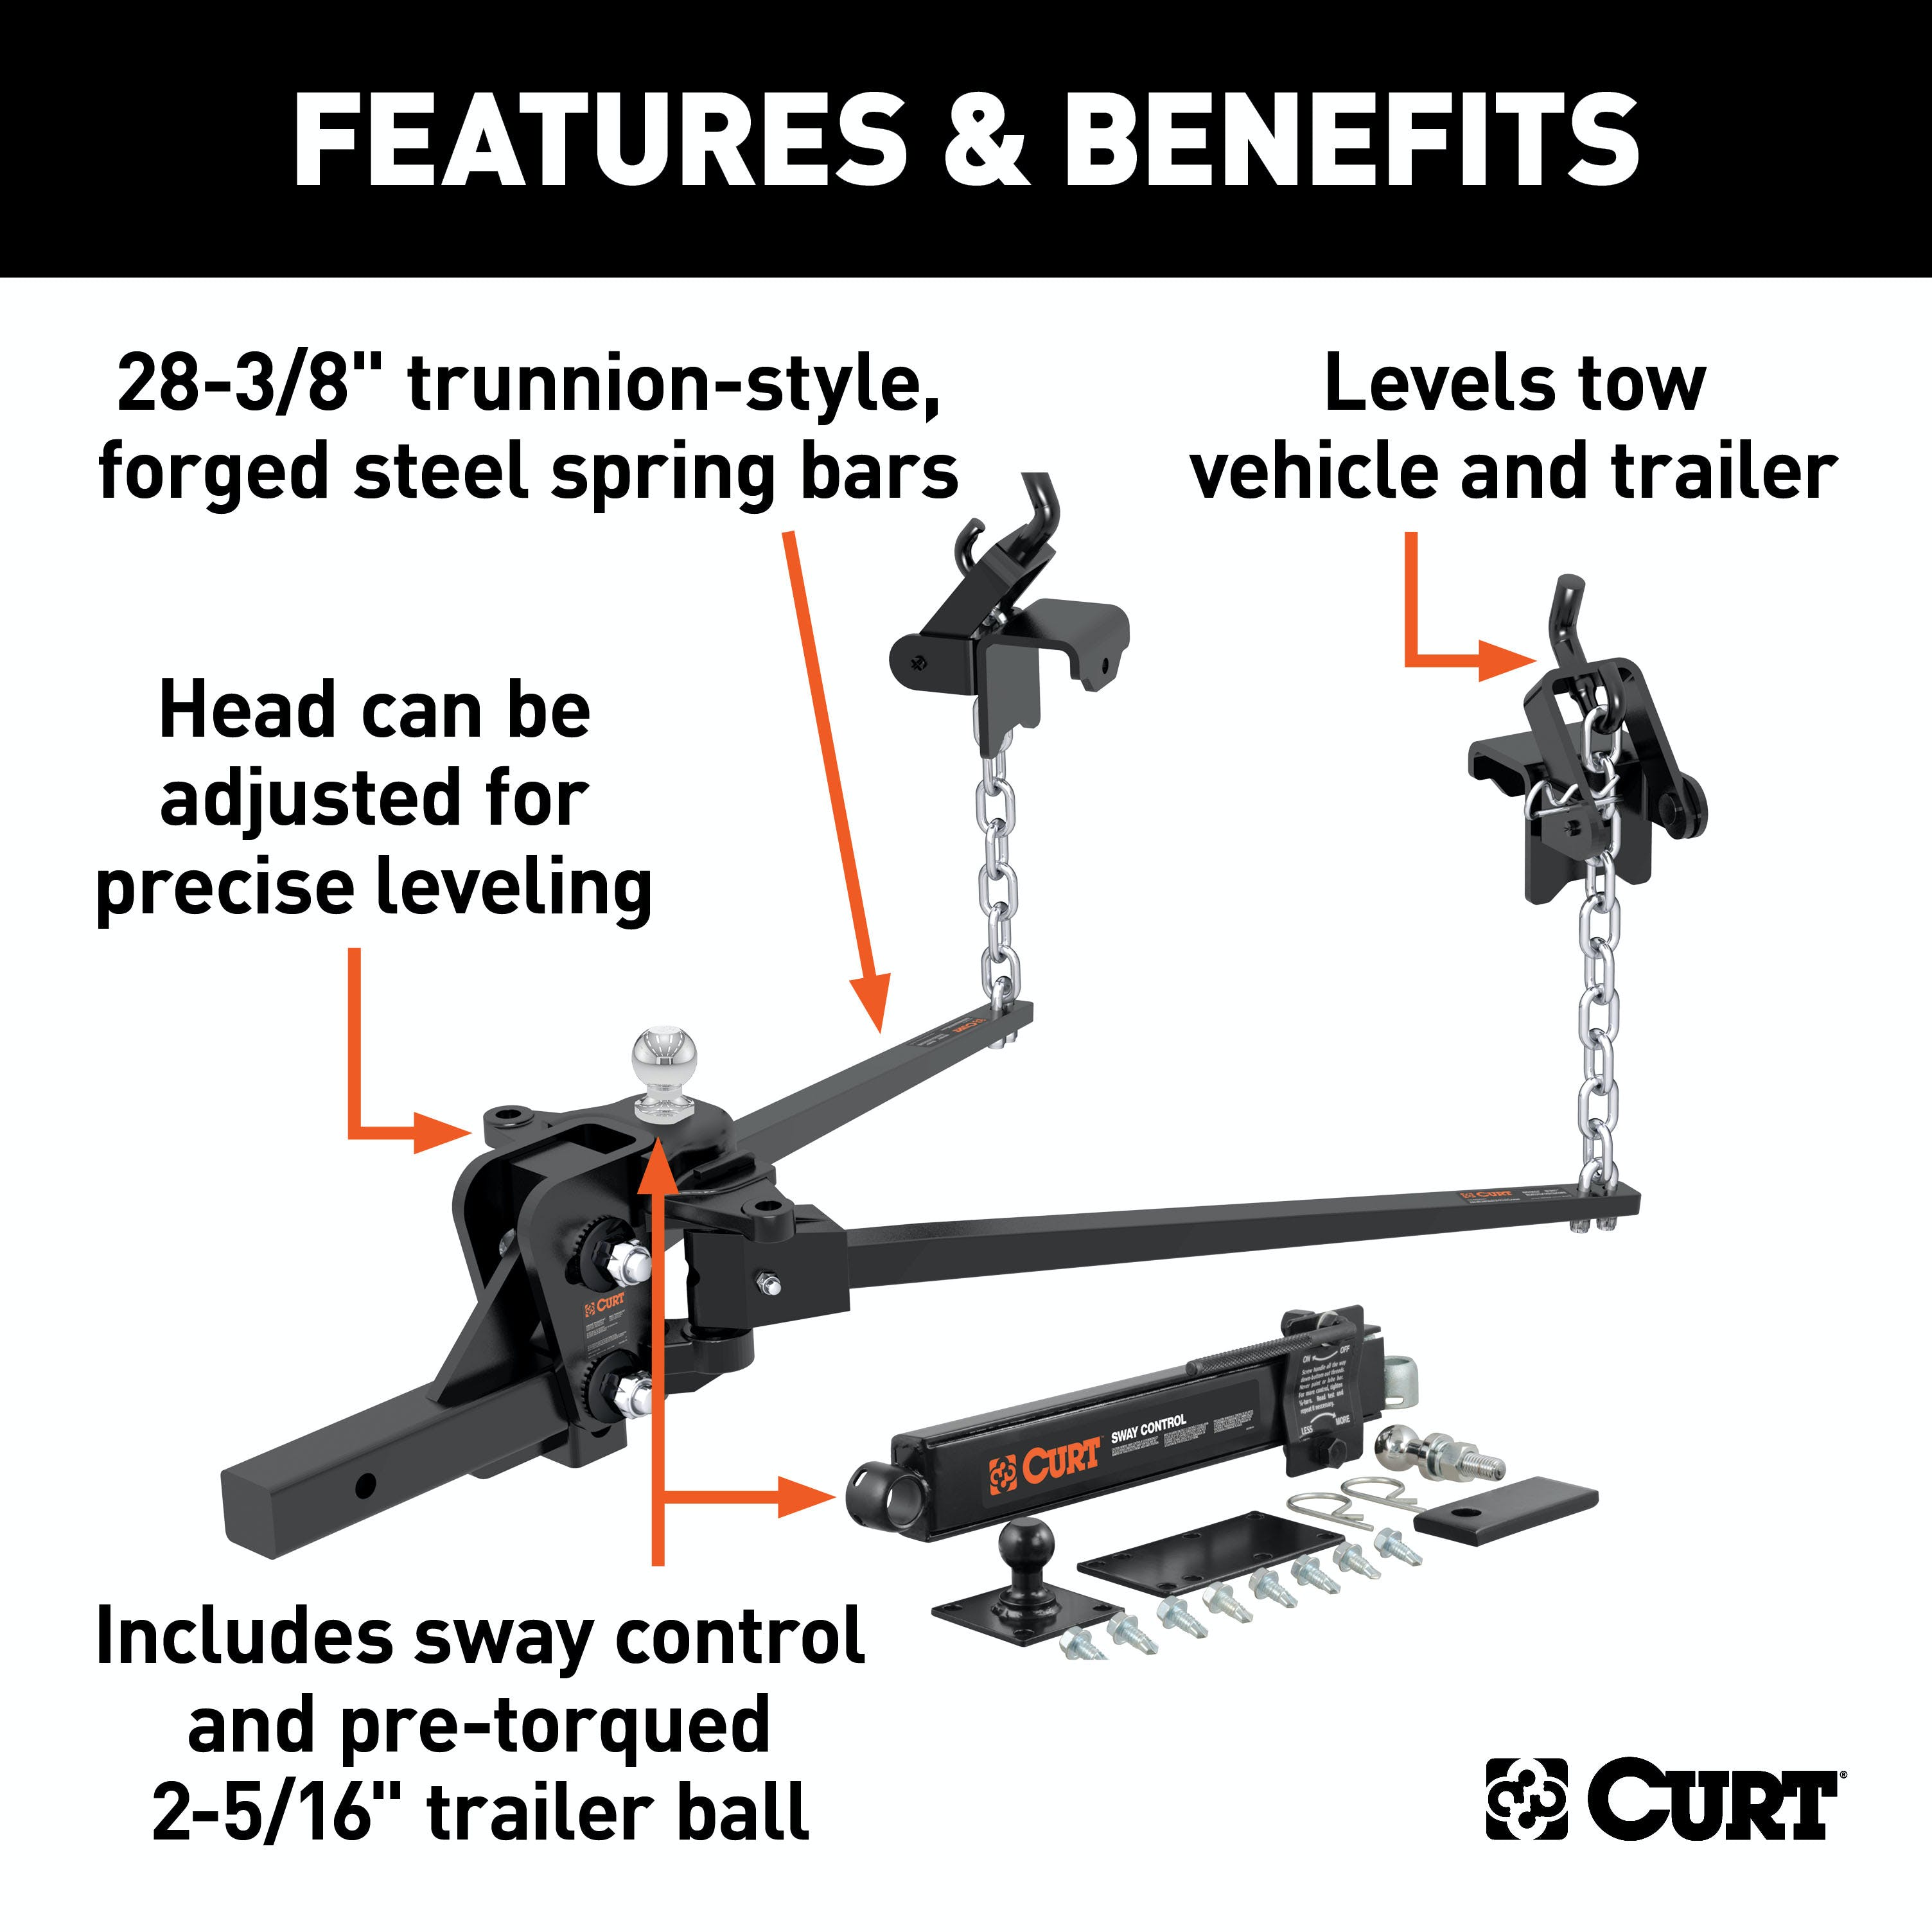 CURT 17422 Short Trunnion Bar Weight Distribution Hitch with Sway Control (10-15K, 28-3/8)